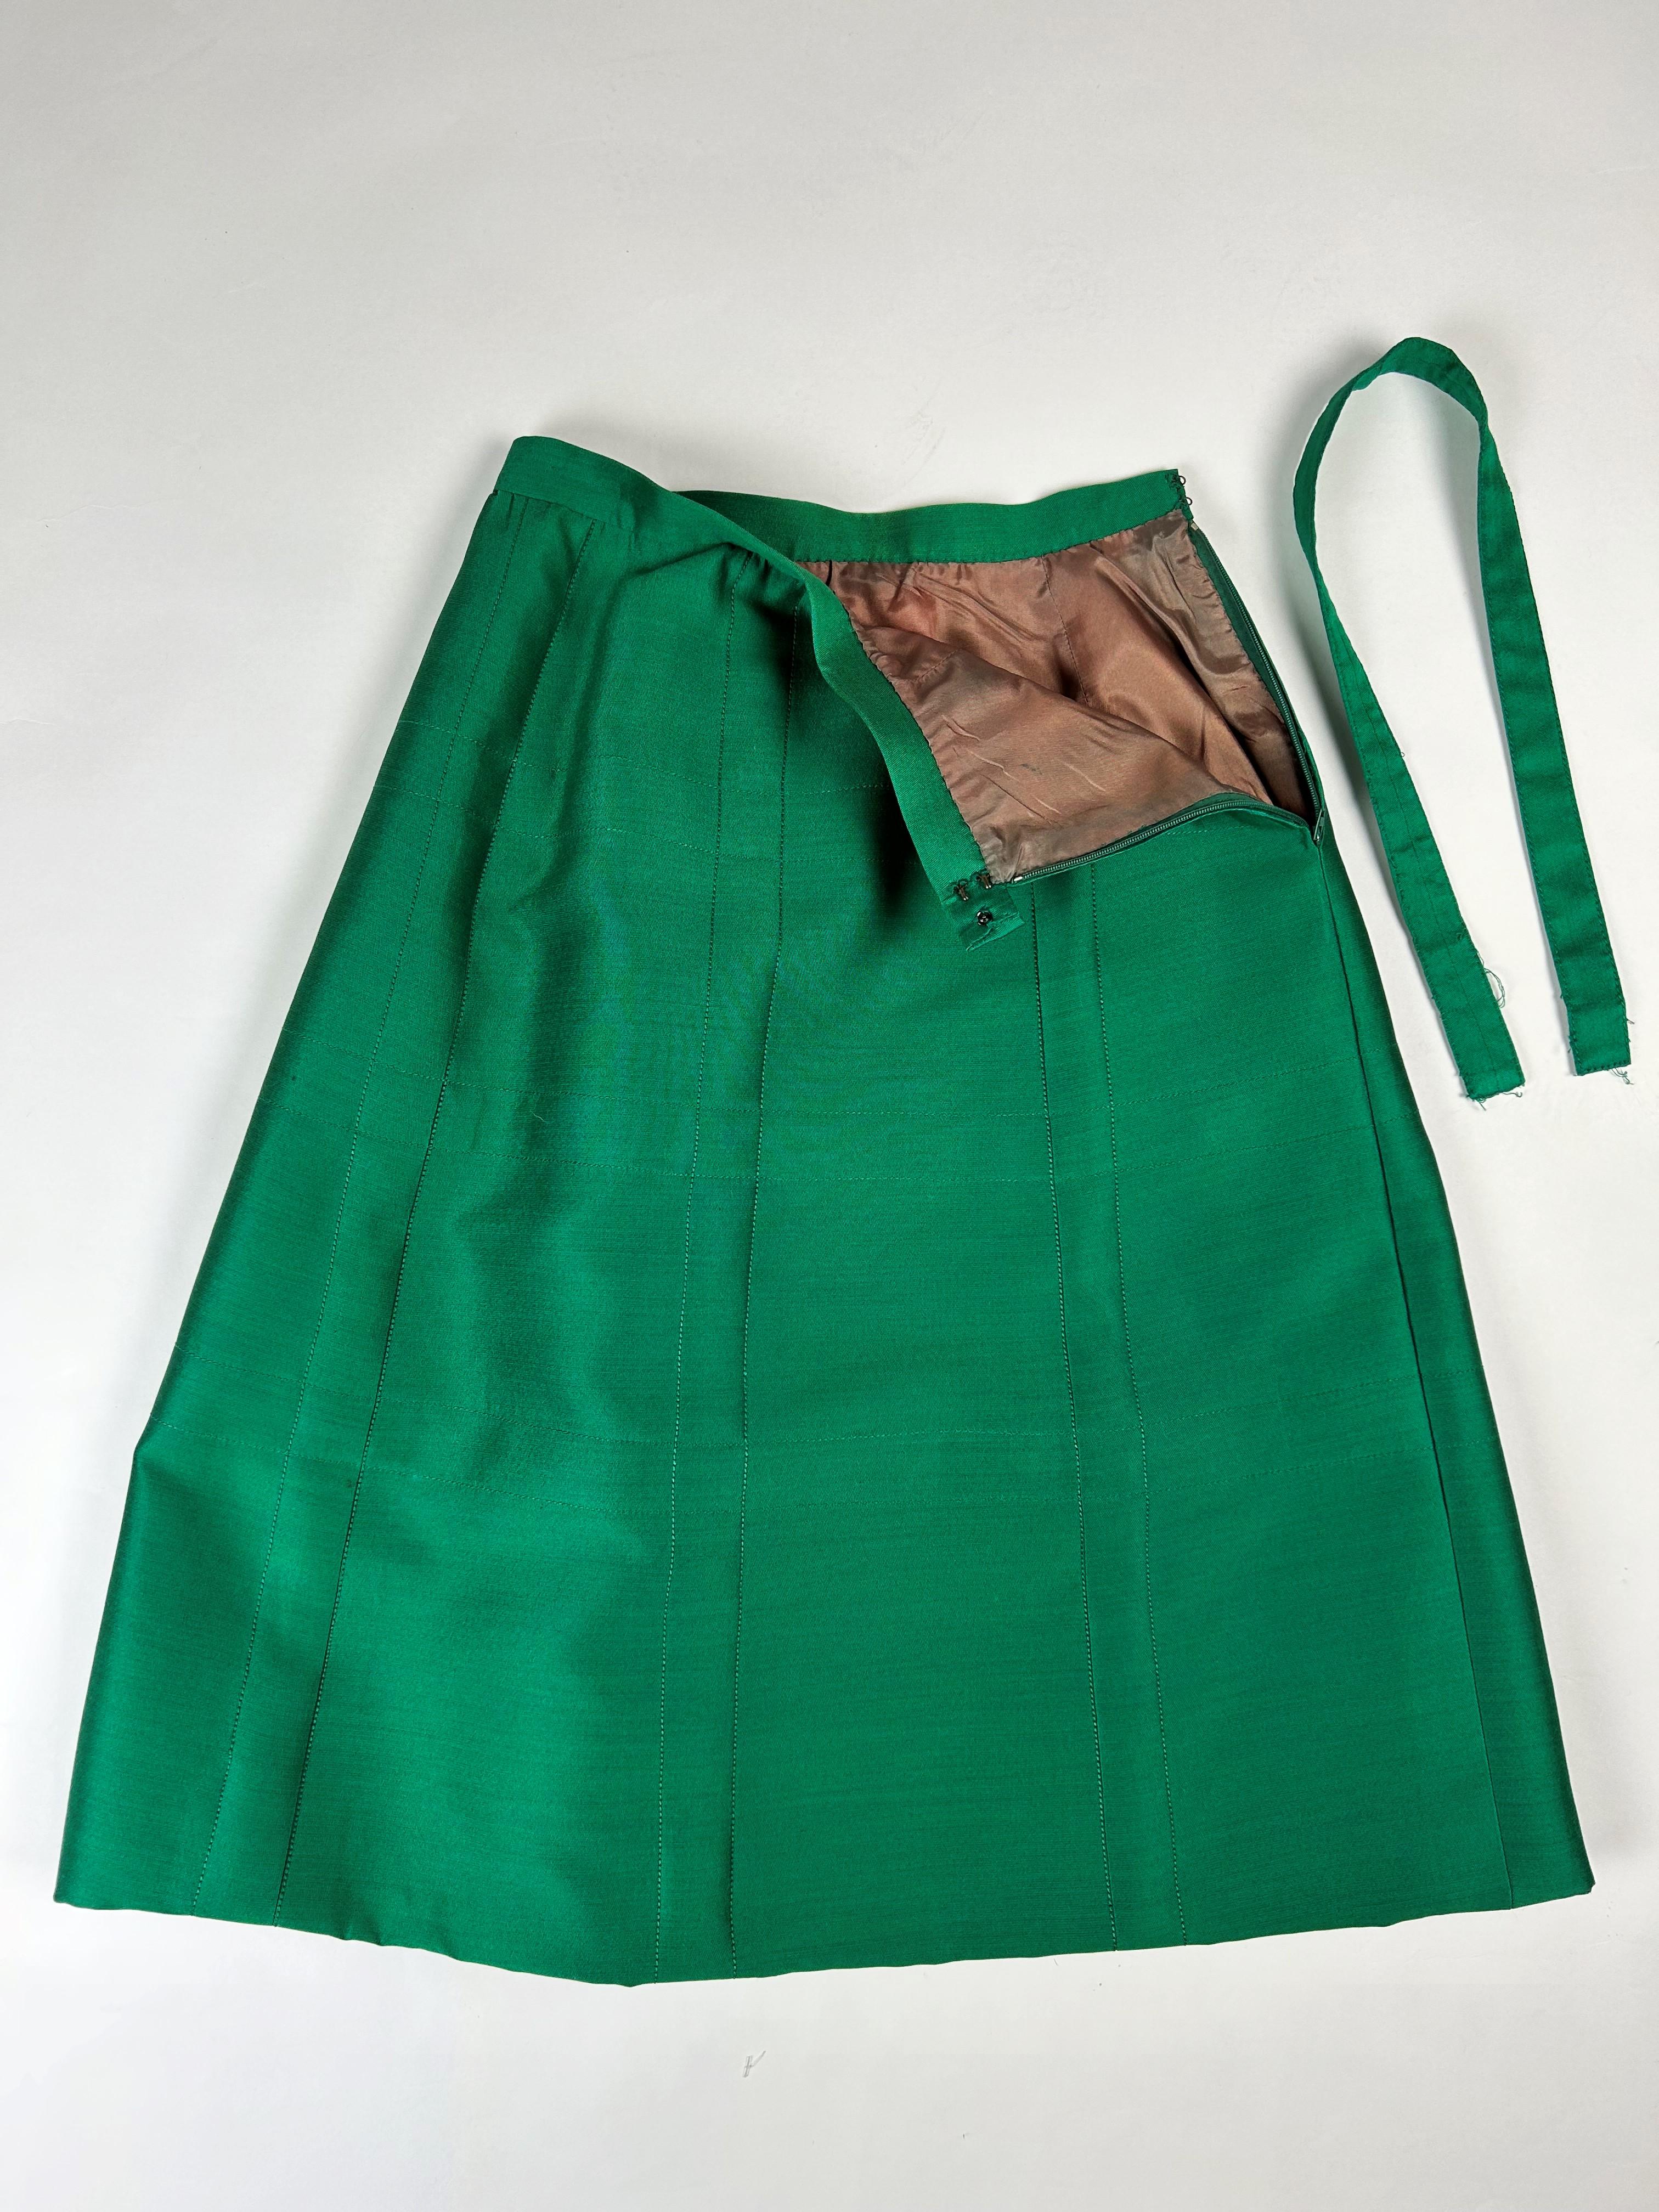 An Emerald Gazar Demi-Couture Skirt Suit by Louis Féraud Circa 1968-1972 For Sale 2